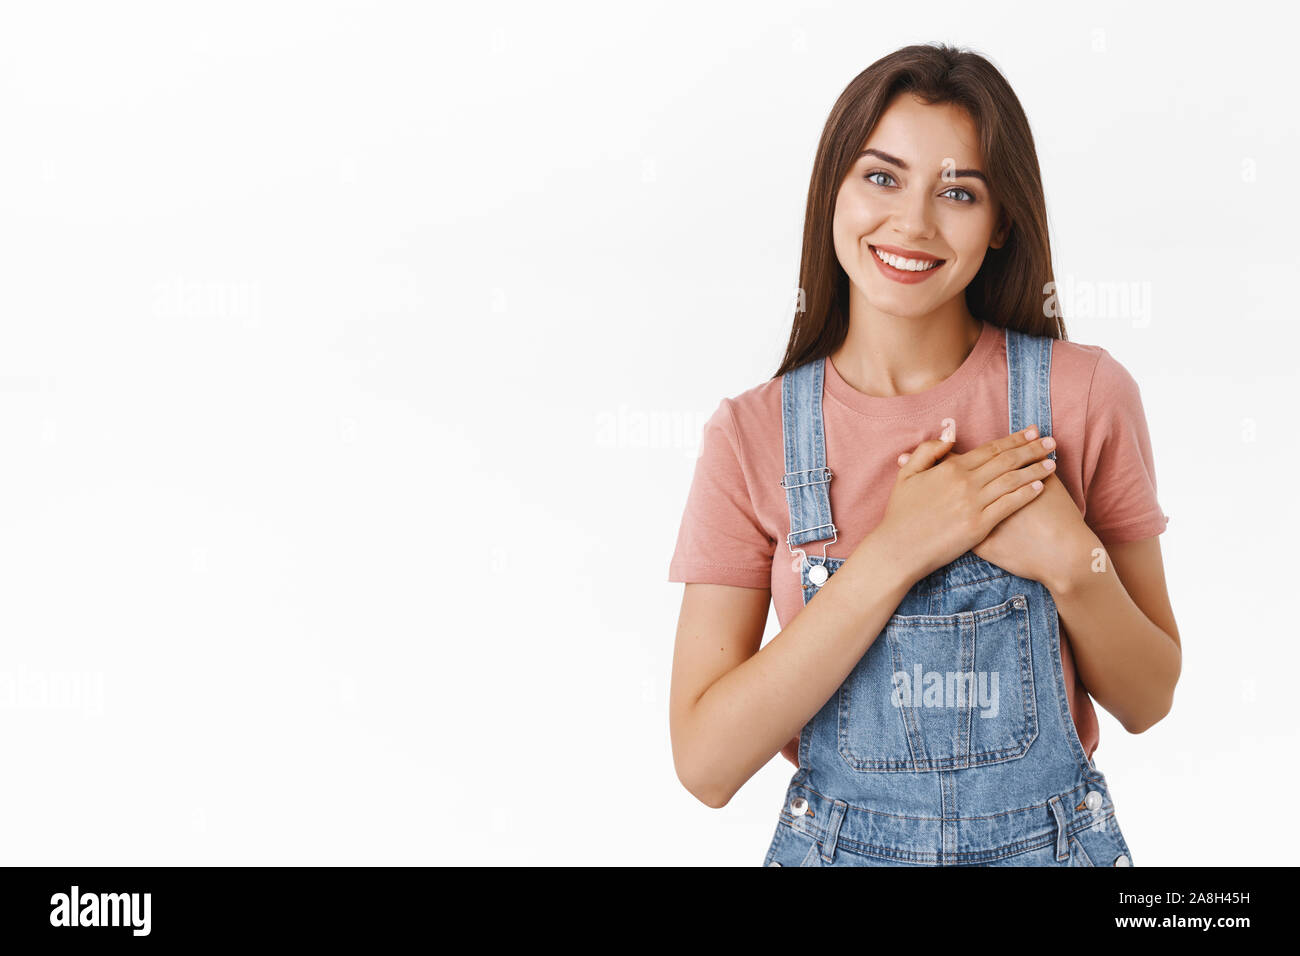 Tender, feminine lovely happy woman in overalls, t-shirt, press hands to heart, tilt head and smiling thanking dearly for help, looking grateful Stock Photo